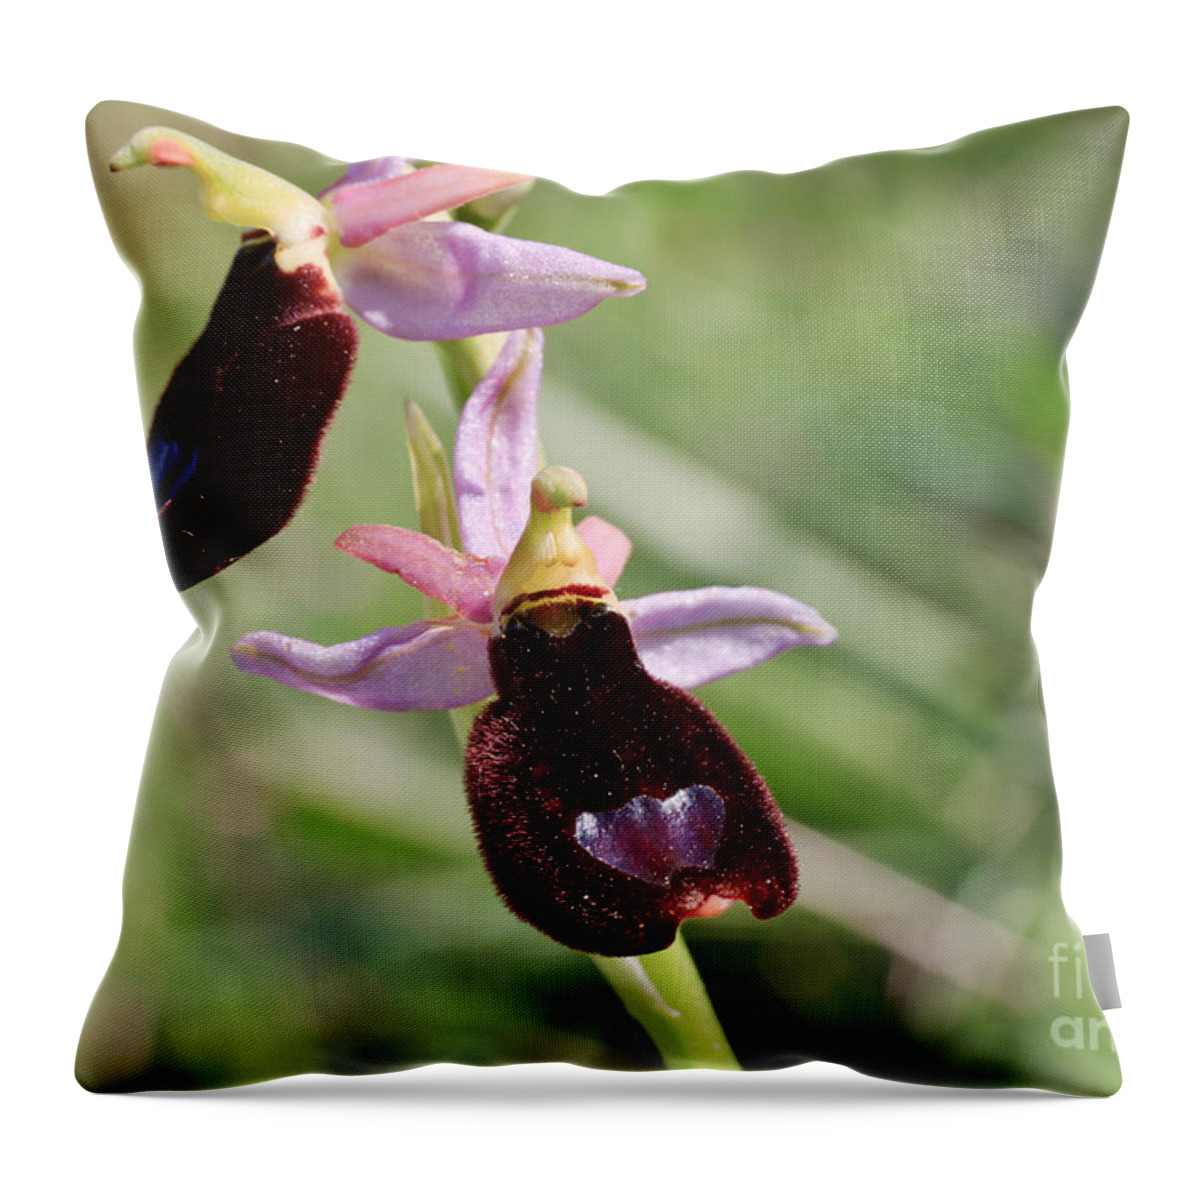 Beautiful Throw Pillow featuring the photograph Ophrys Bertolonii by Antonio Scarpi